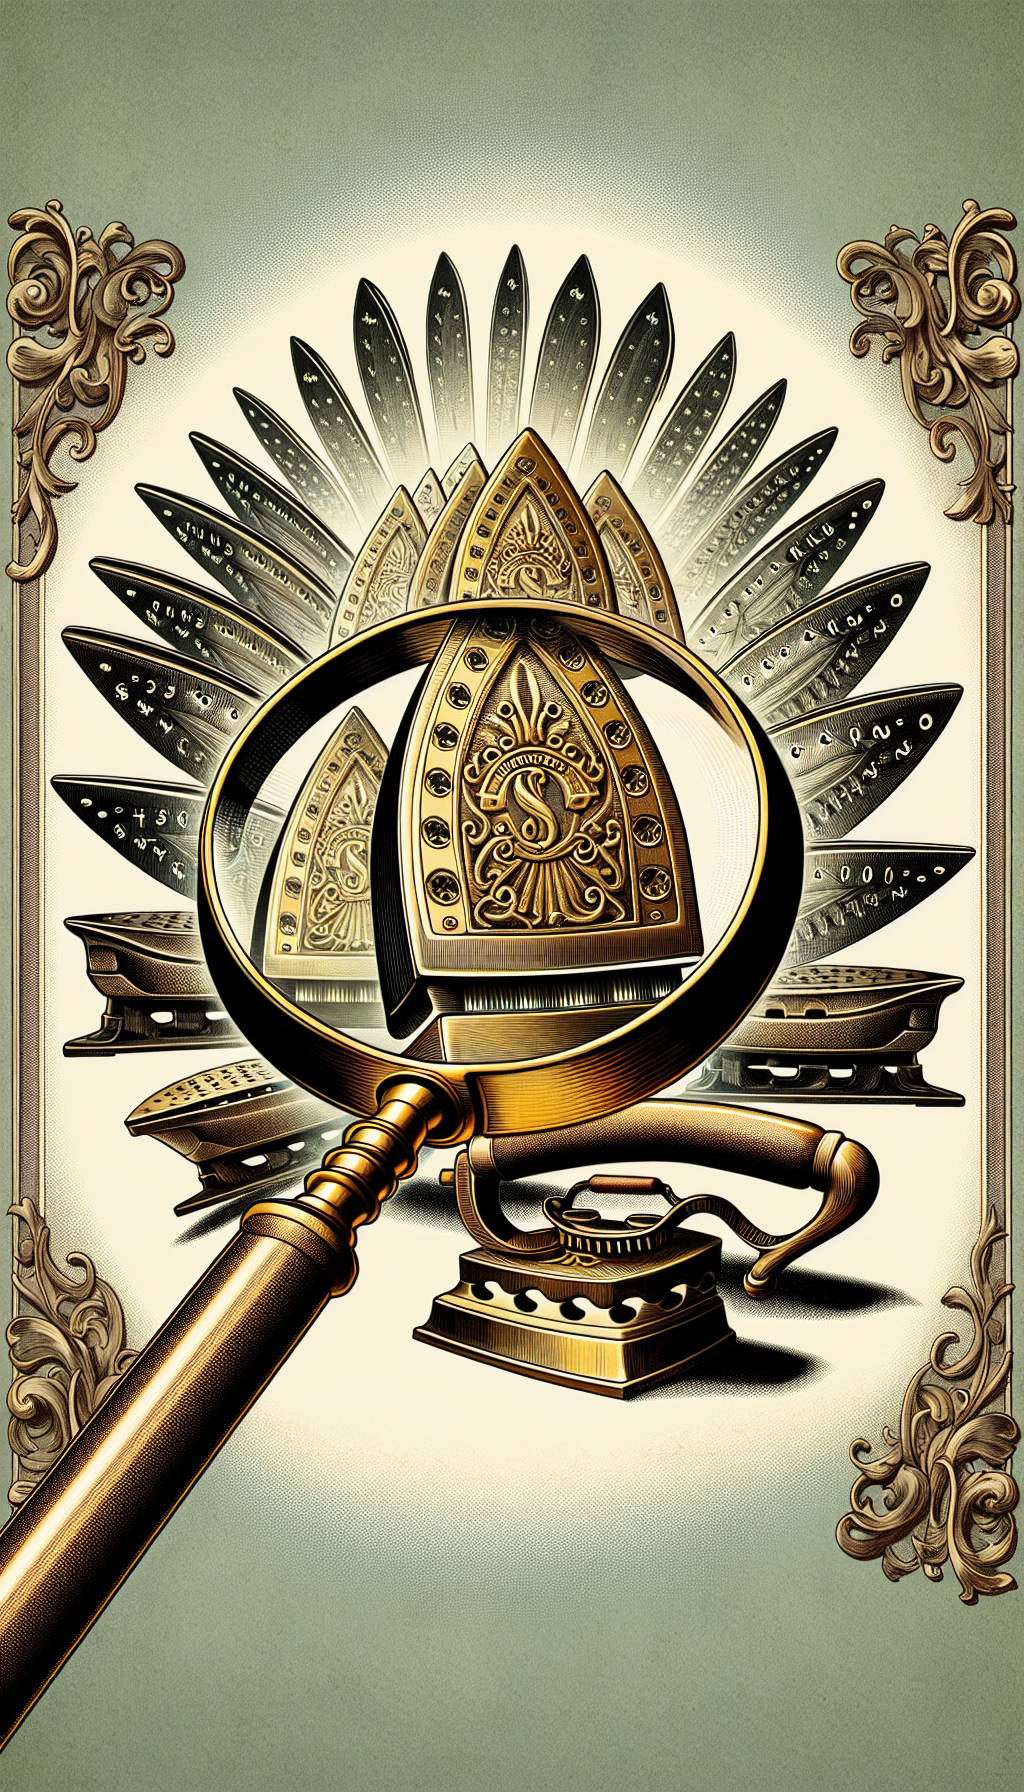 An intricate Victorian-style illustration depicts a magnifying glass focusing on a cluster of antique irons arrayed like a fan, each showcasing a distinct, embossed manufacturer's stamp shimmering in golden ink. The irons cast a shadow that morphs into ascending dollar values, implying their growing worth, while ornate filigree frames the image, symbolizing their antique status.